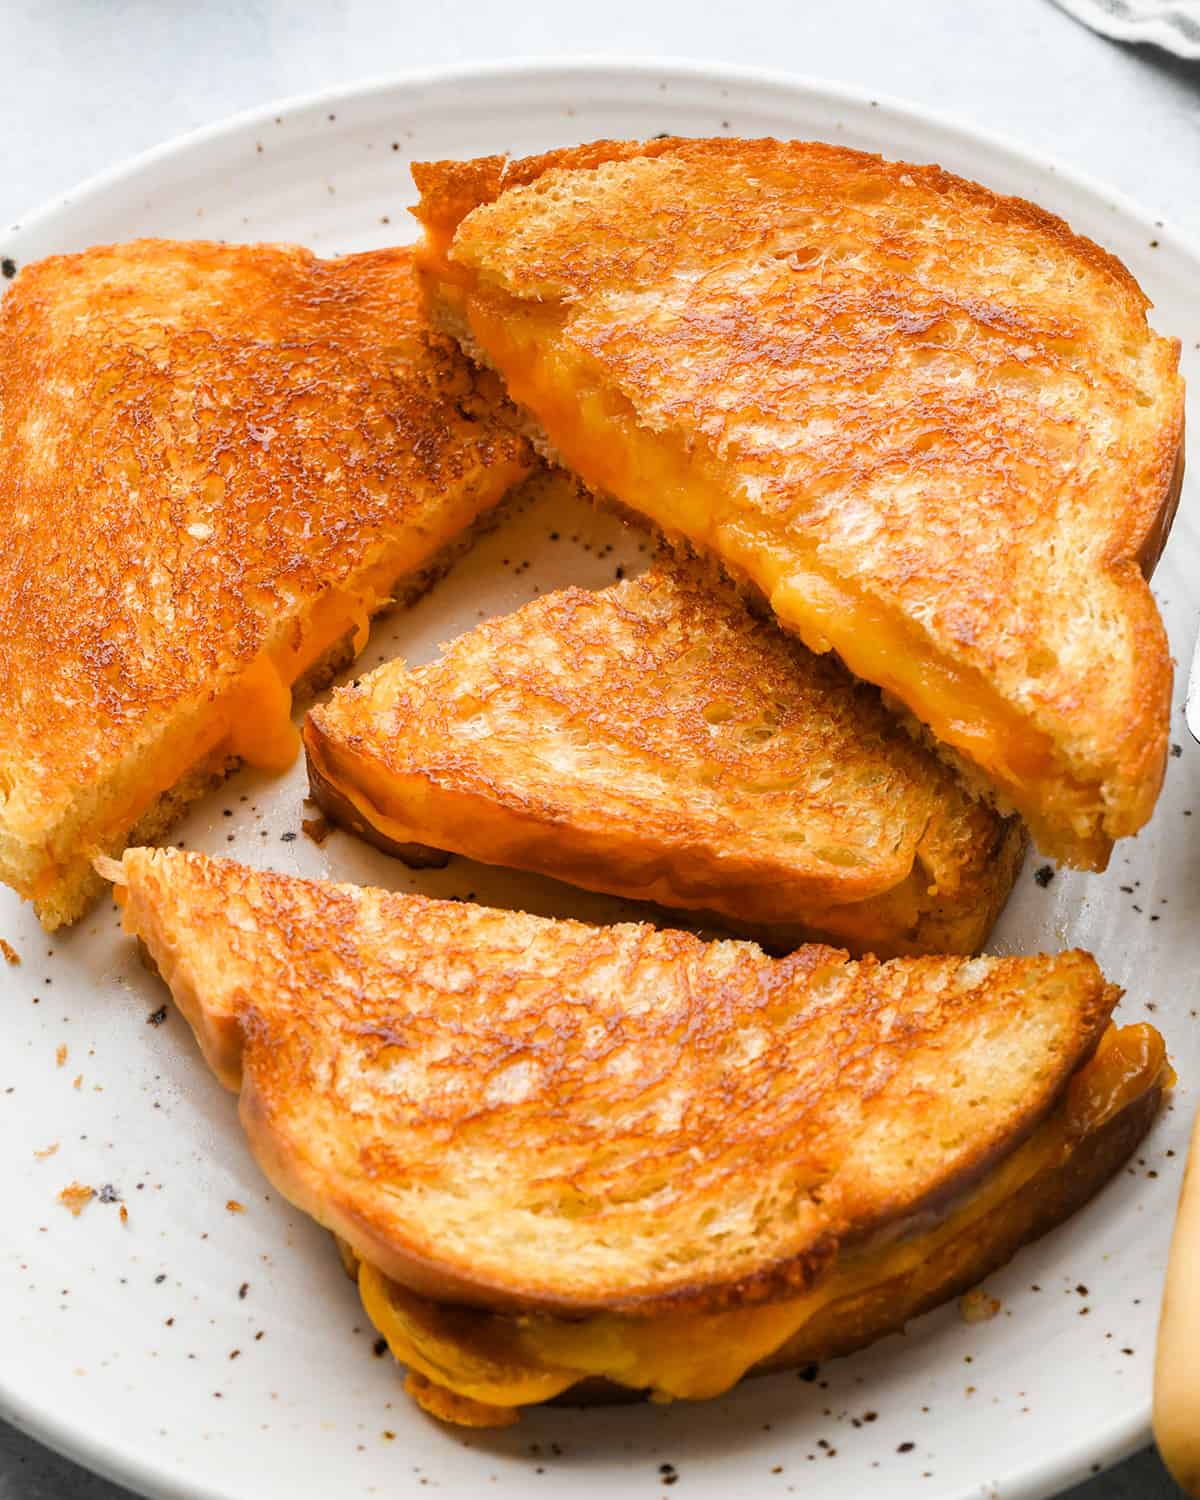 4 halves of grilled cheese on a plate